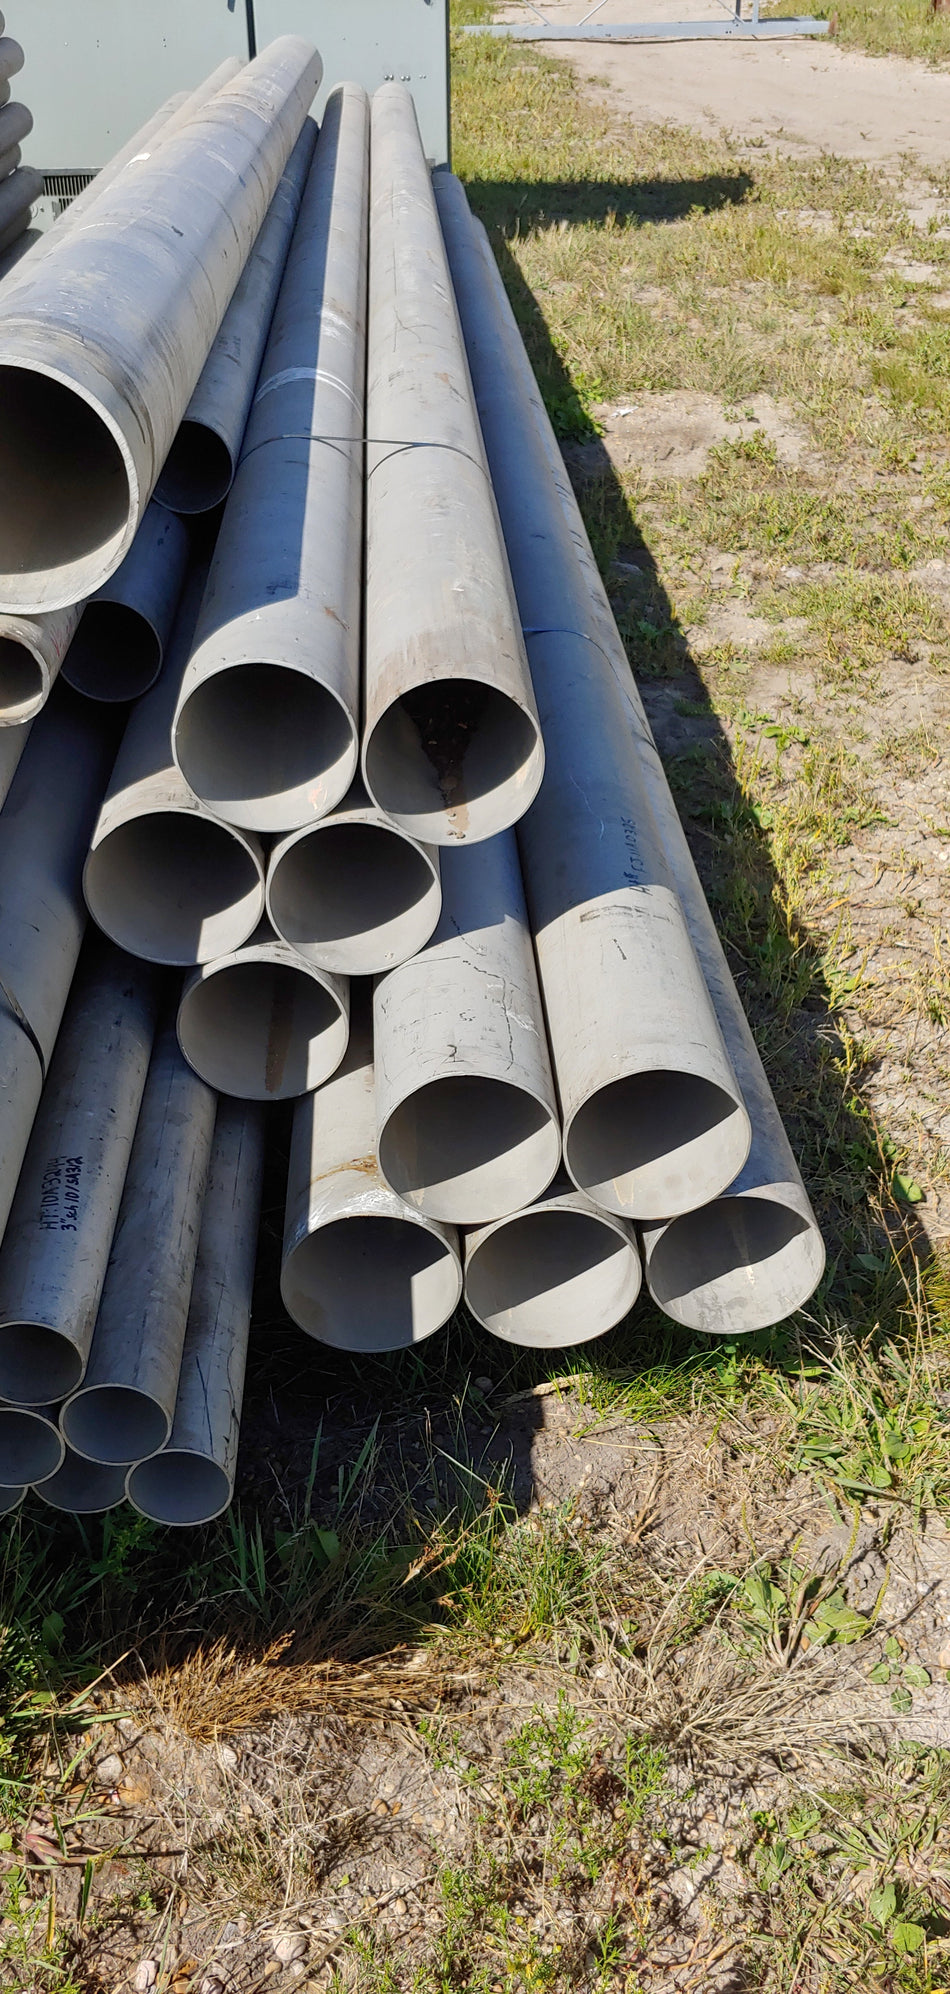 New 6" Schedule 10 Stainless Steel 304L Pipe in 20 ft lengths